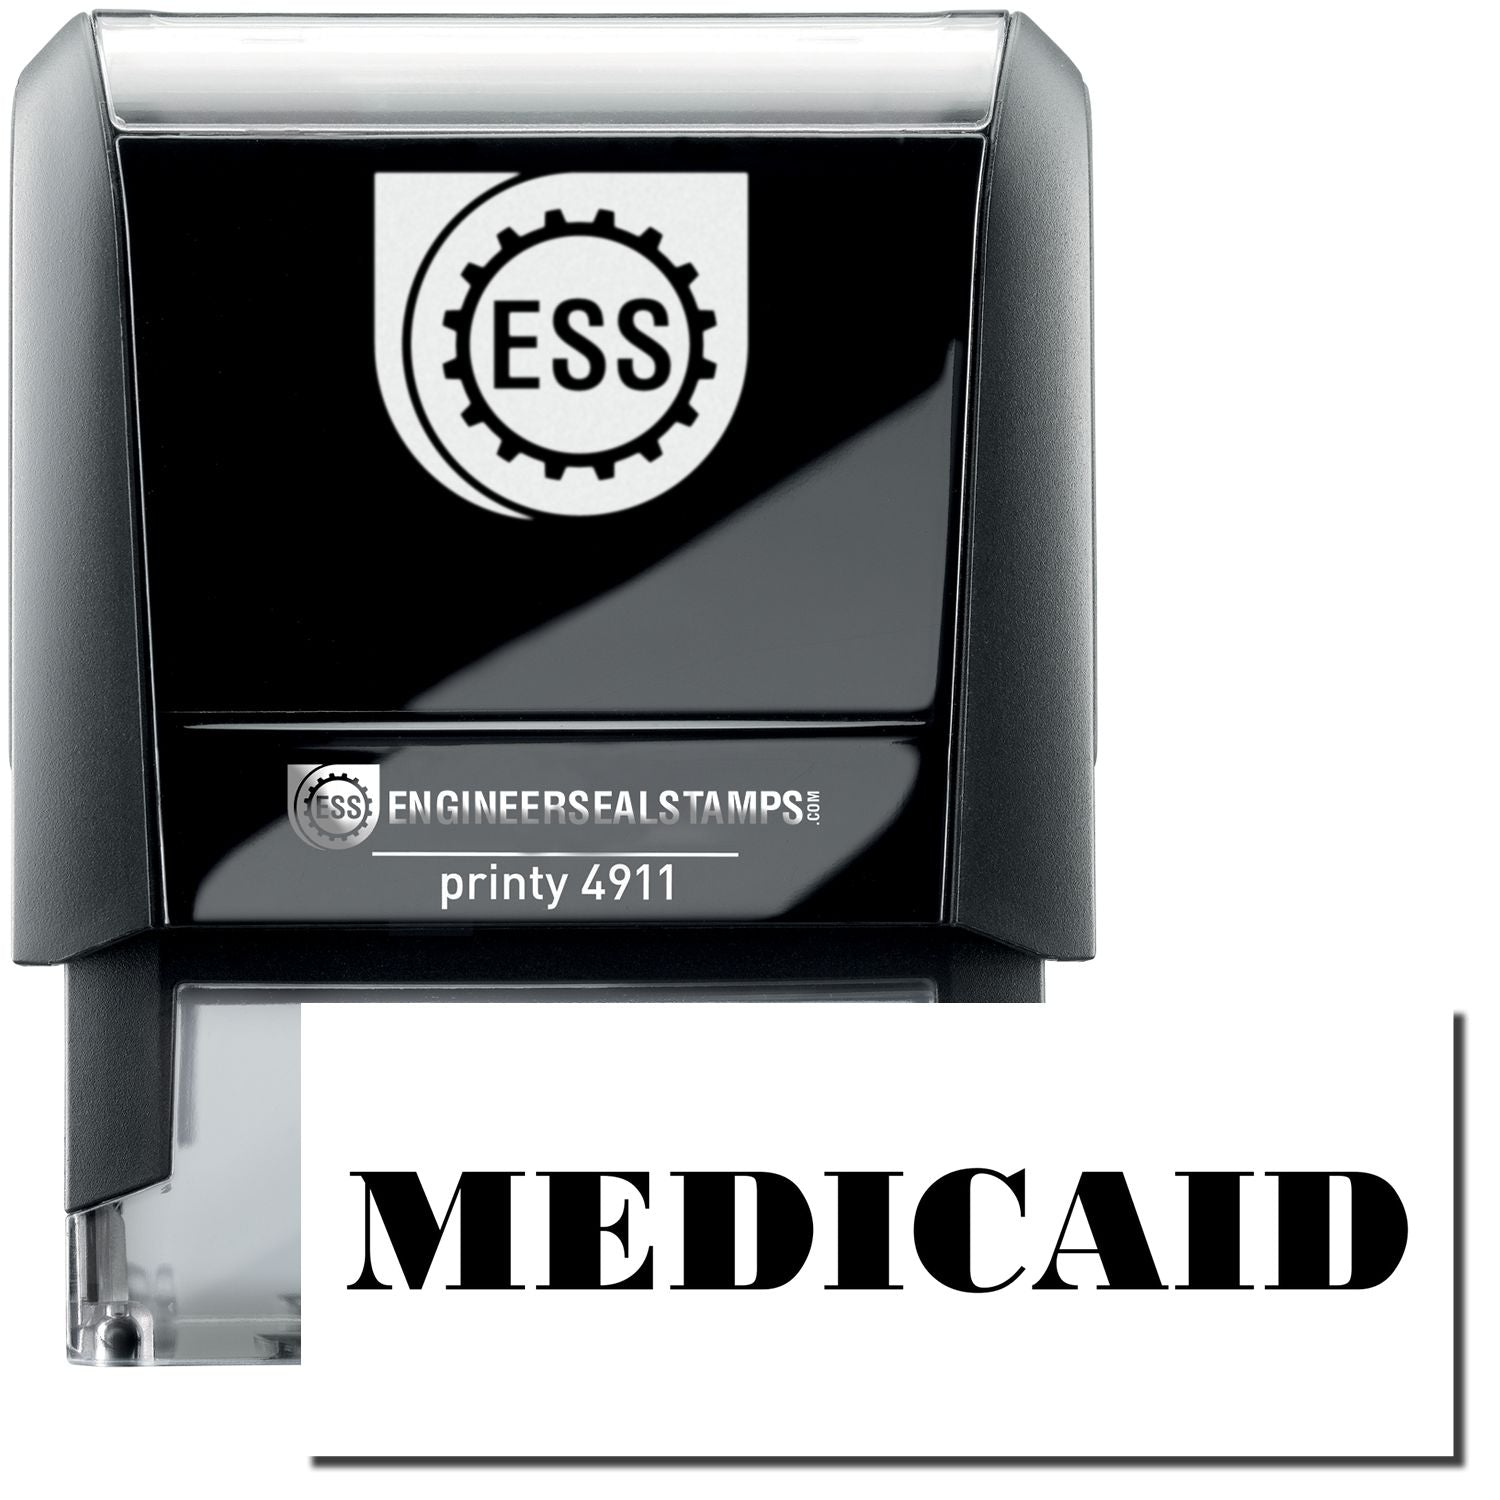 A self-inking stamp with a stamped image showing how the text "MEDICAID" is displayed after stamping.